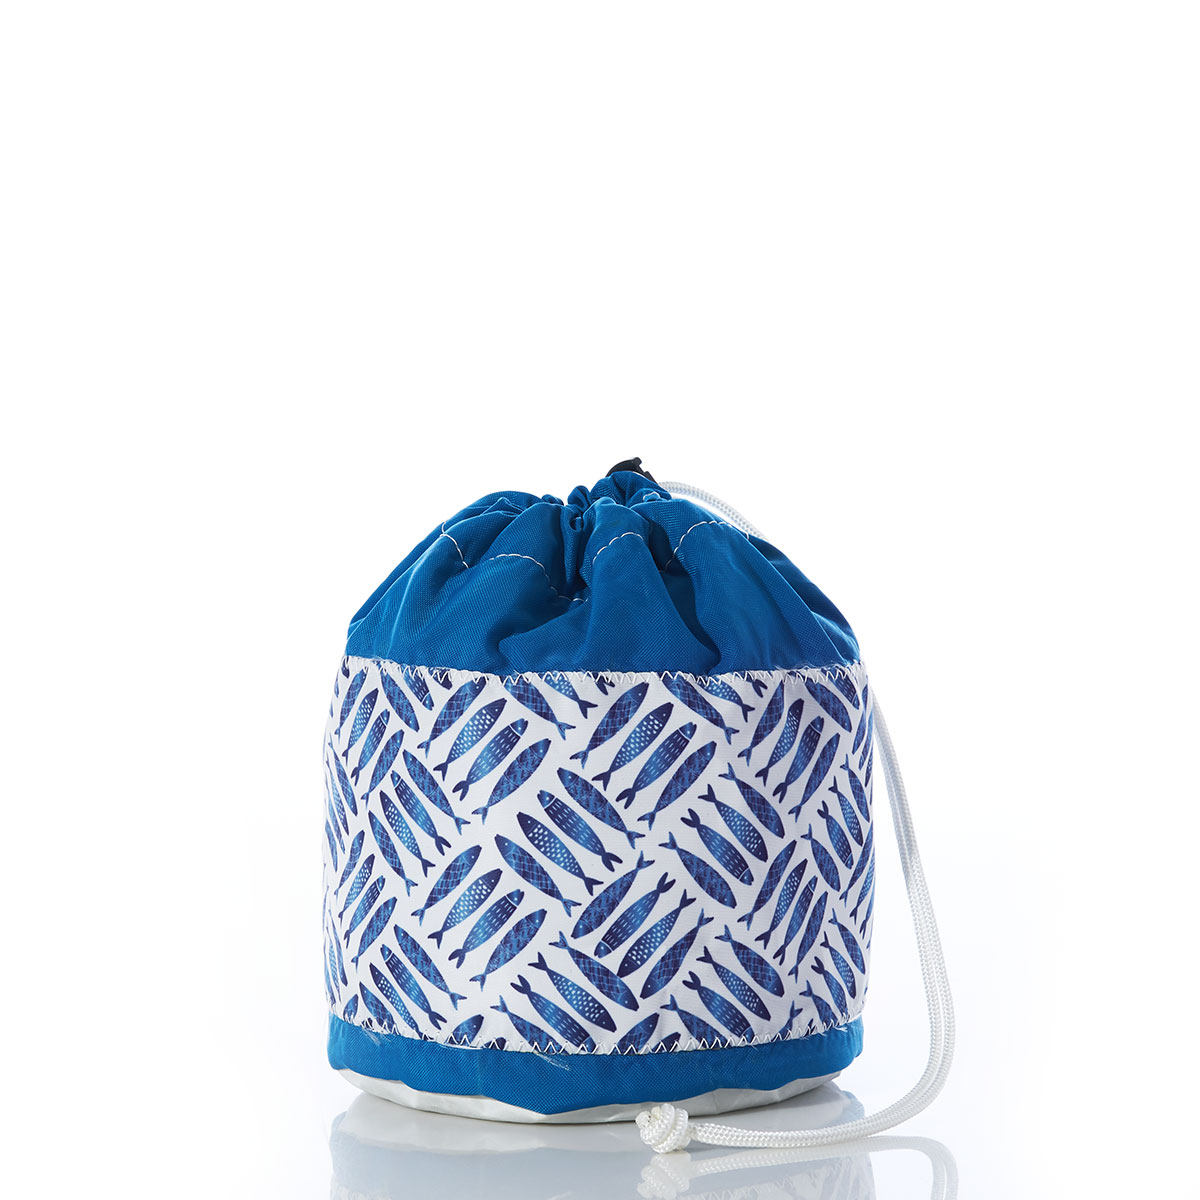 criss cross print of blue school of fish on recycled sail cloth ditty bag with drawstring